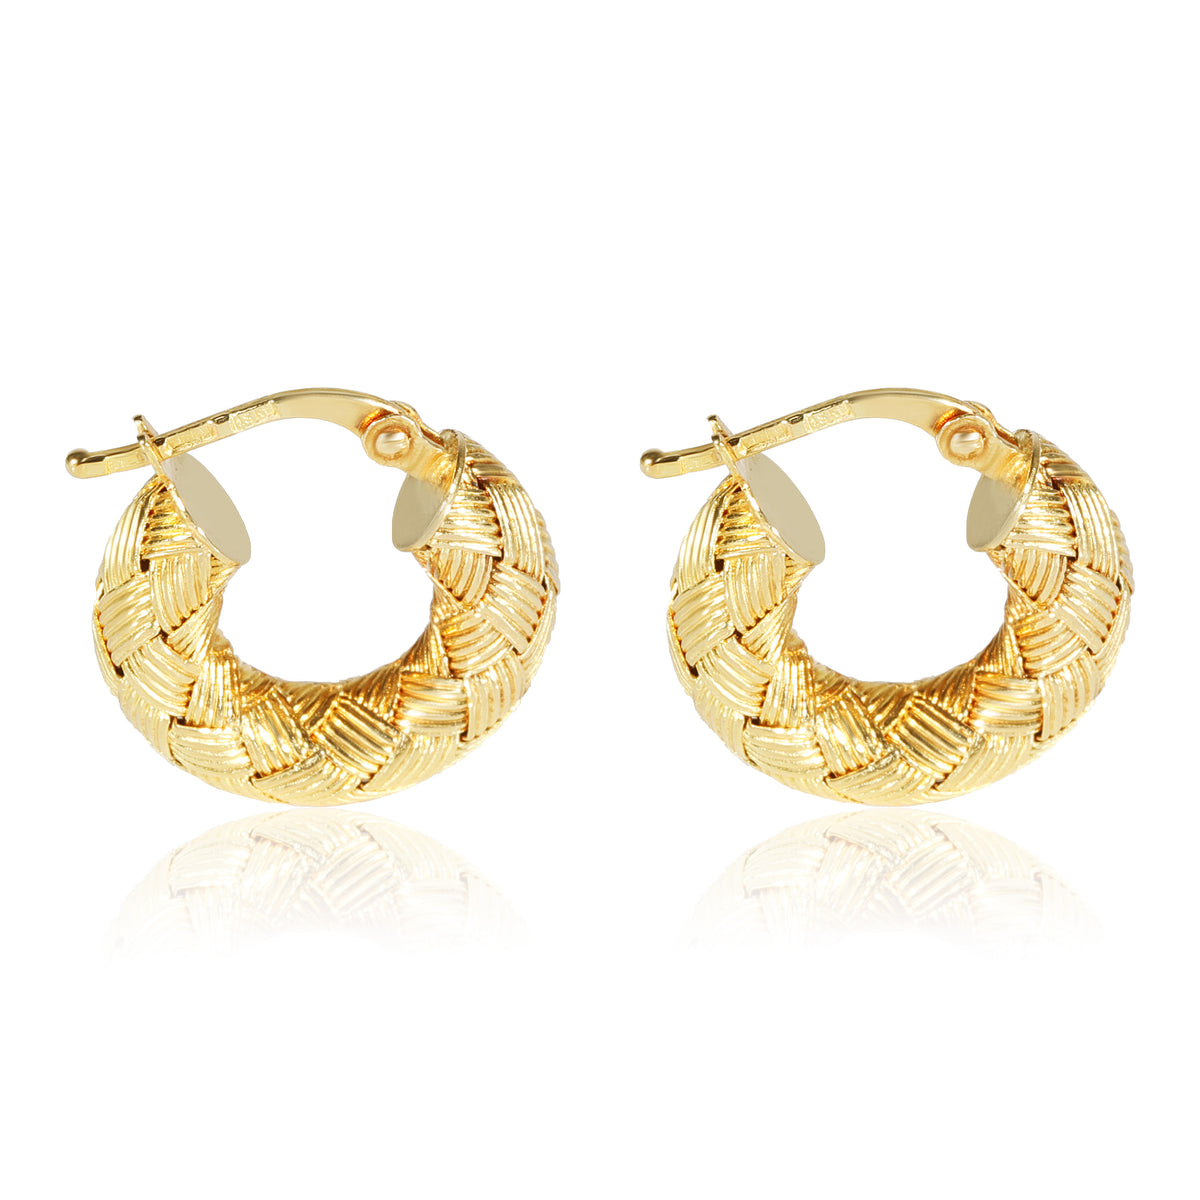 Roberto Coin Woven Earrings in 18k Yellow Gold